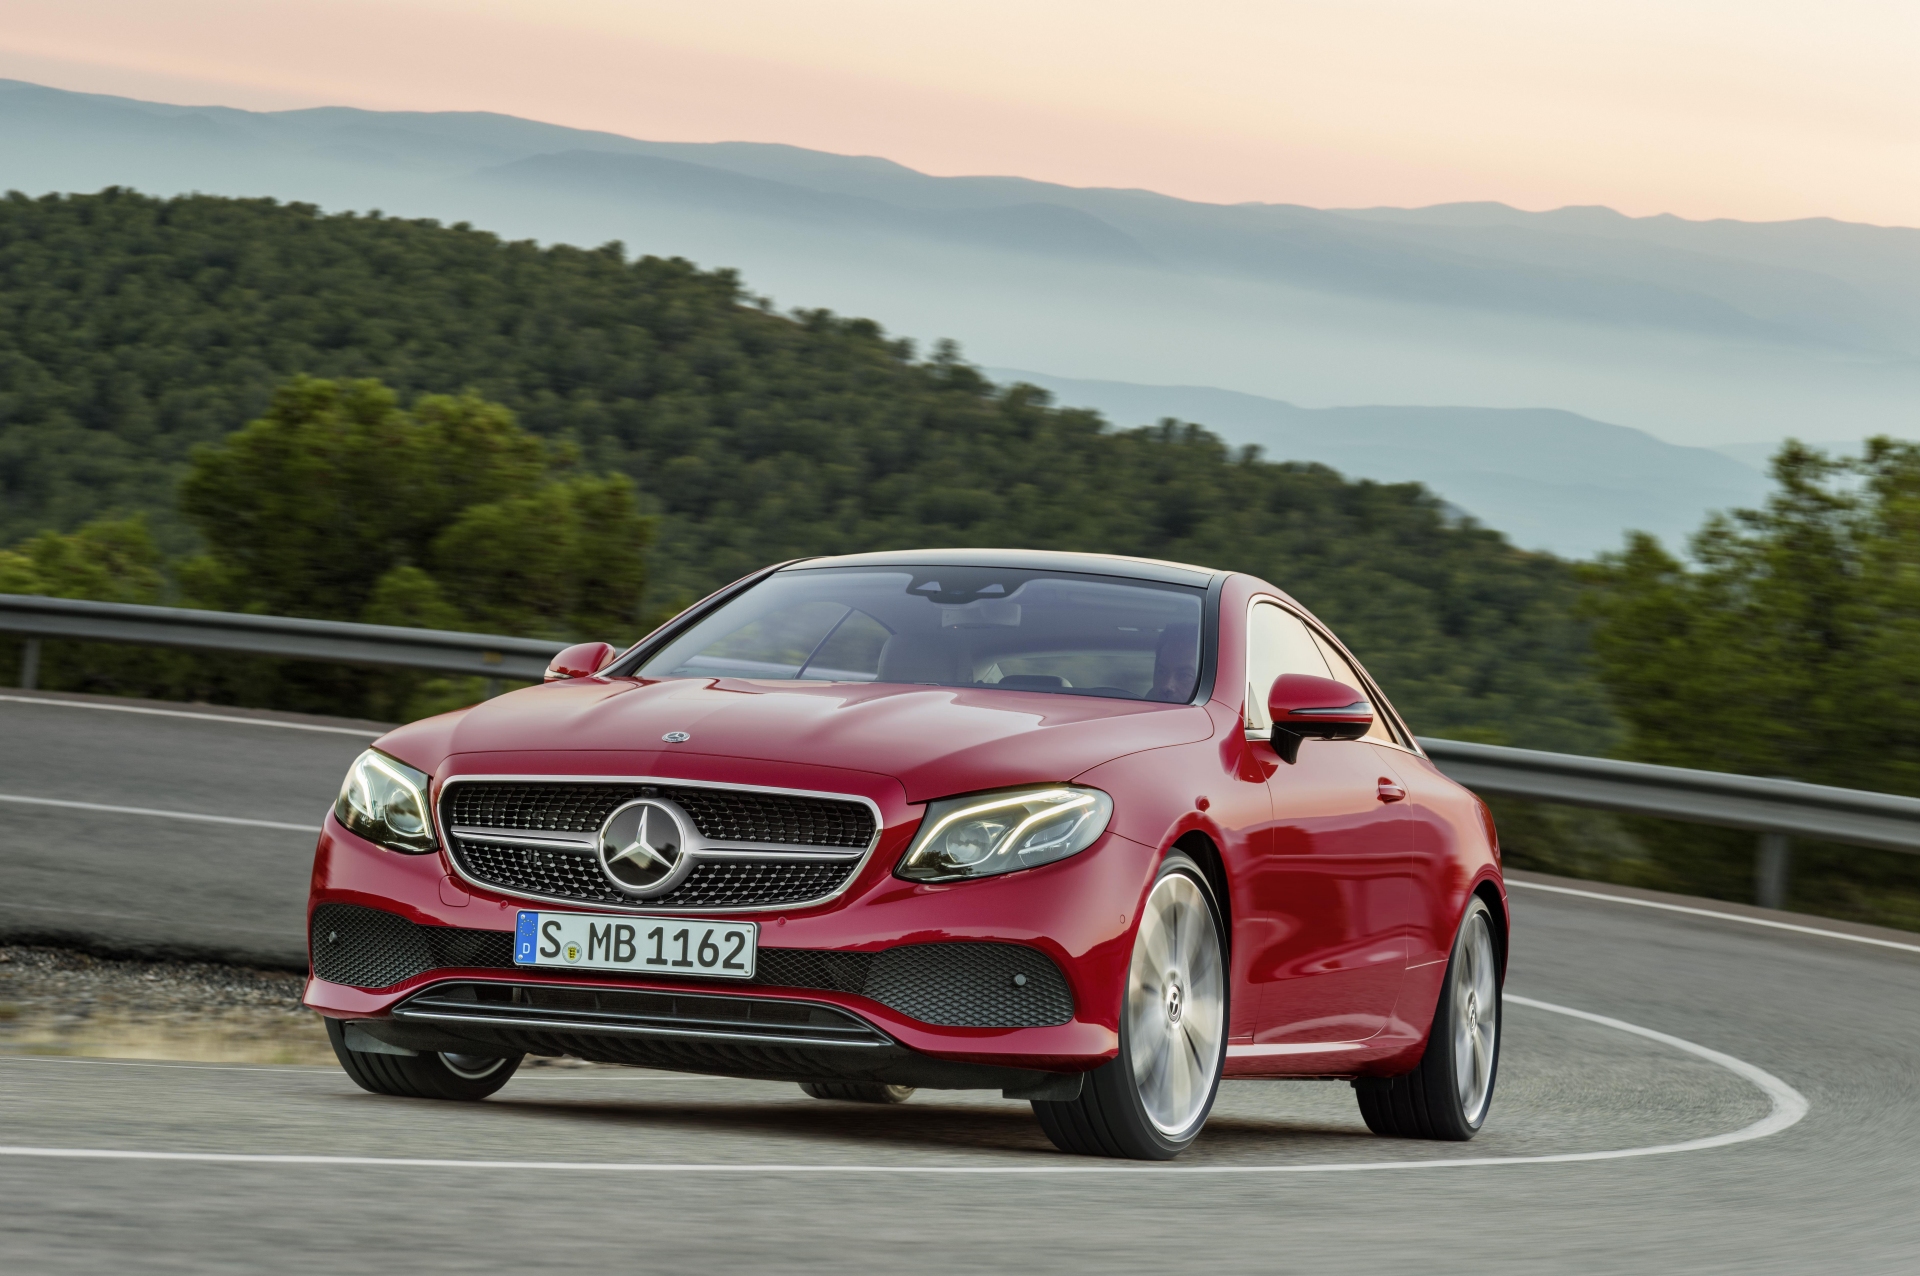 2017 Mercedes-Benz E-Class Coupe - Red Exterior - Front Right Side Quarter - Dynamic